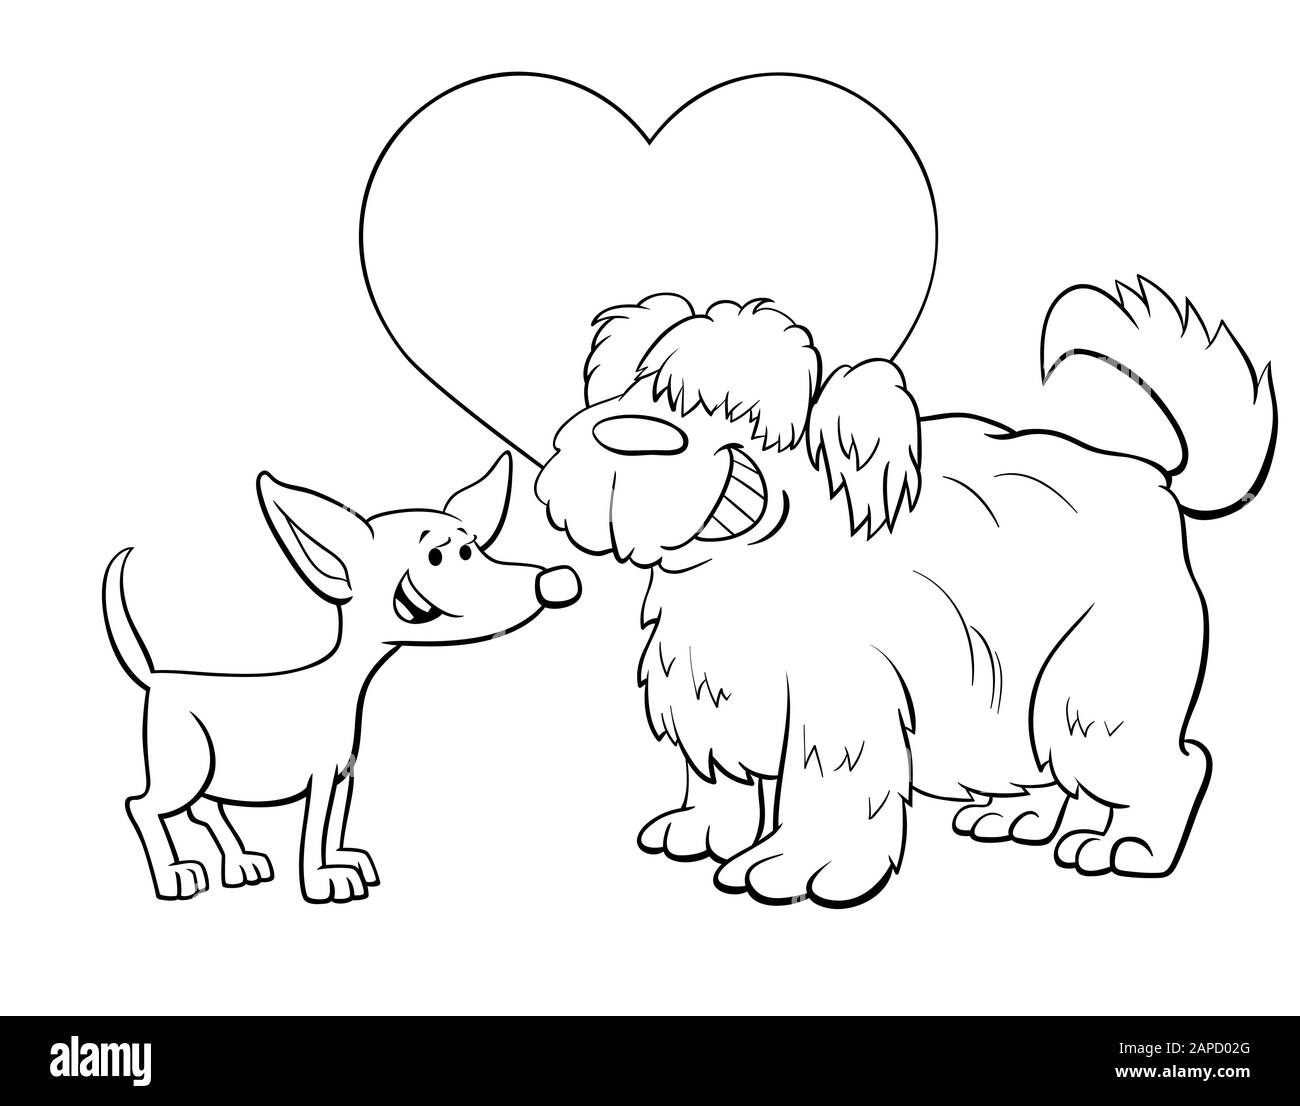 Black and White Valentines Day Greeting Card Cartoon Illustration with Funny Dog Characters in Love Coloring Book Page Stock Vector